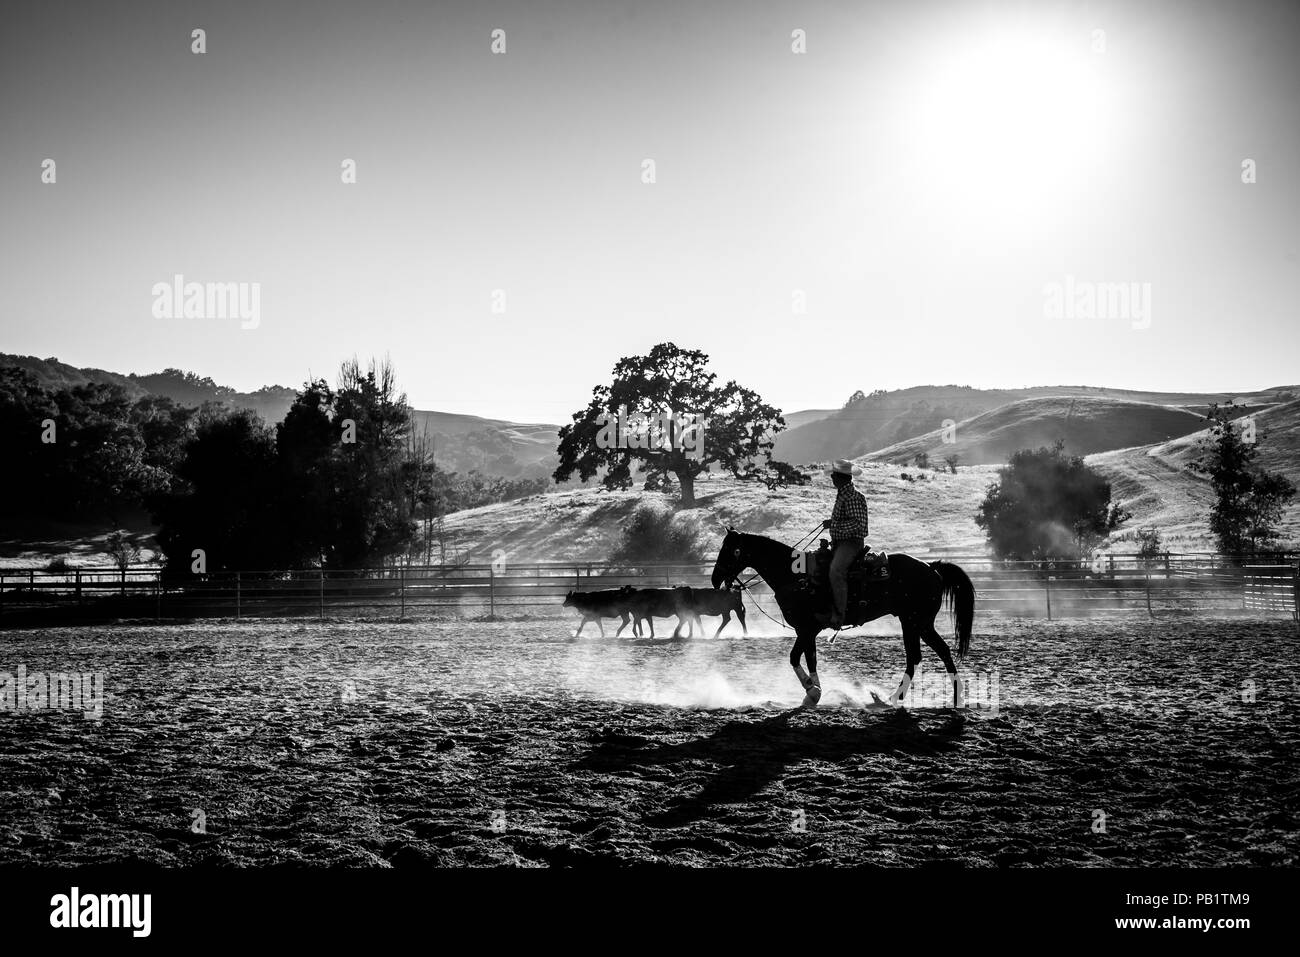 A lone rider on horseback brings in a small group of 3 cattle in black and white silhouette against the sunset with rolling hills and an oak tree. Stock Photo